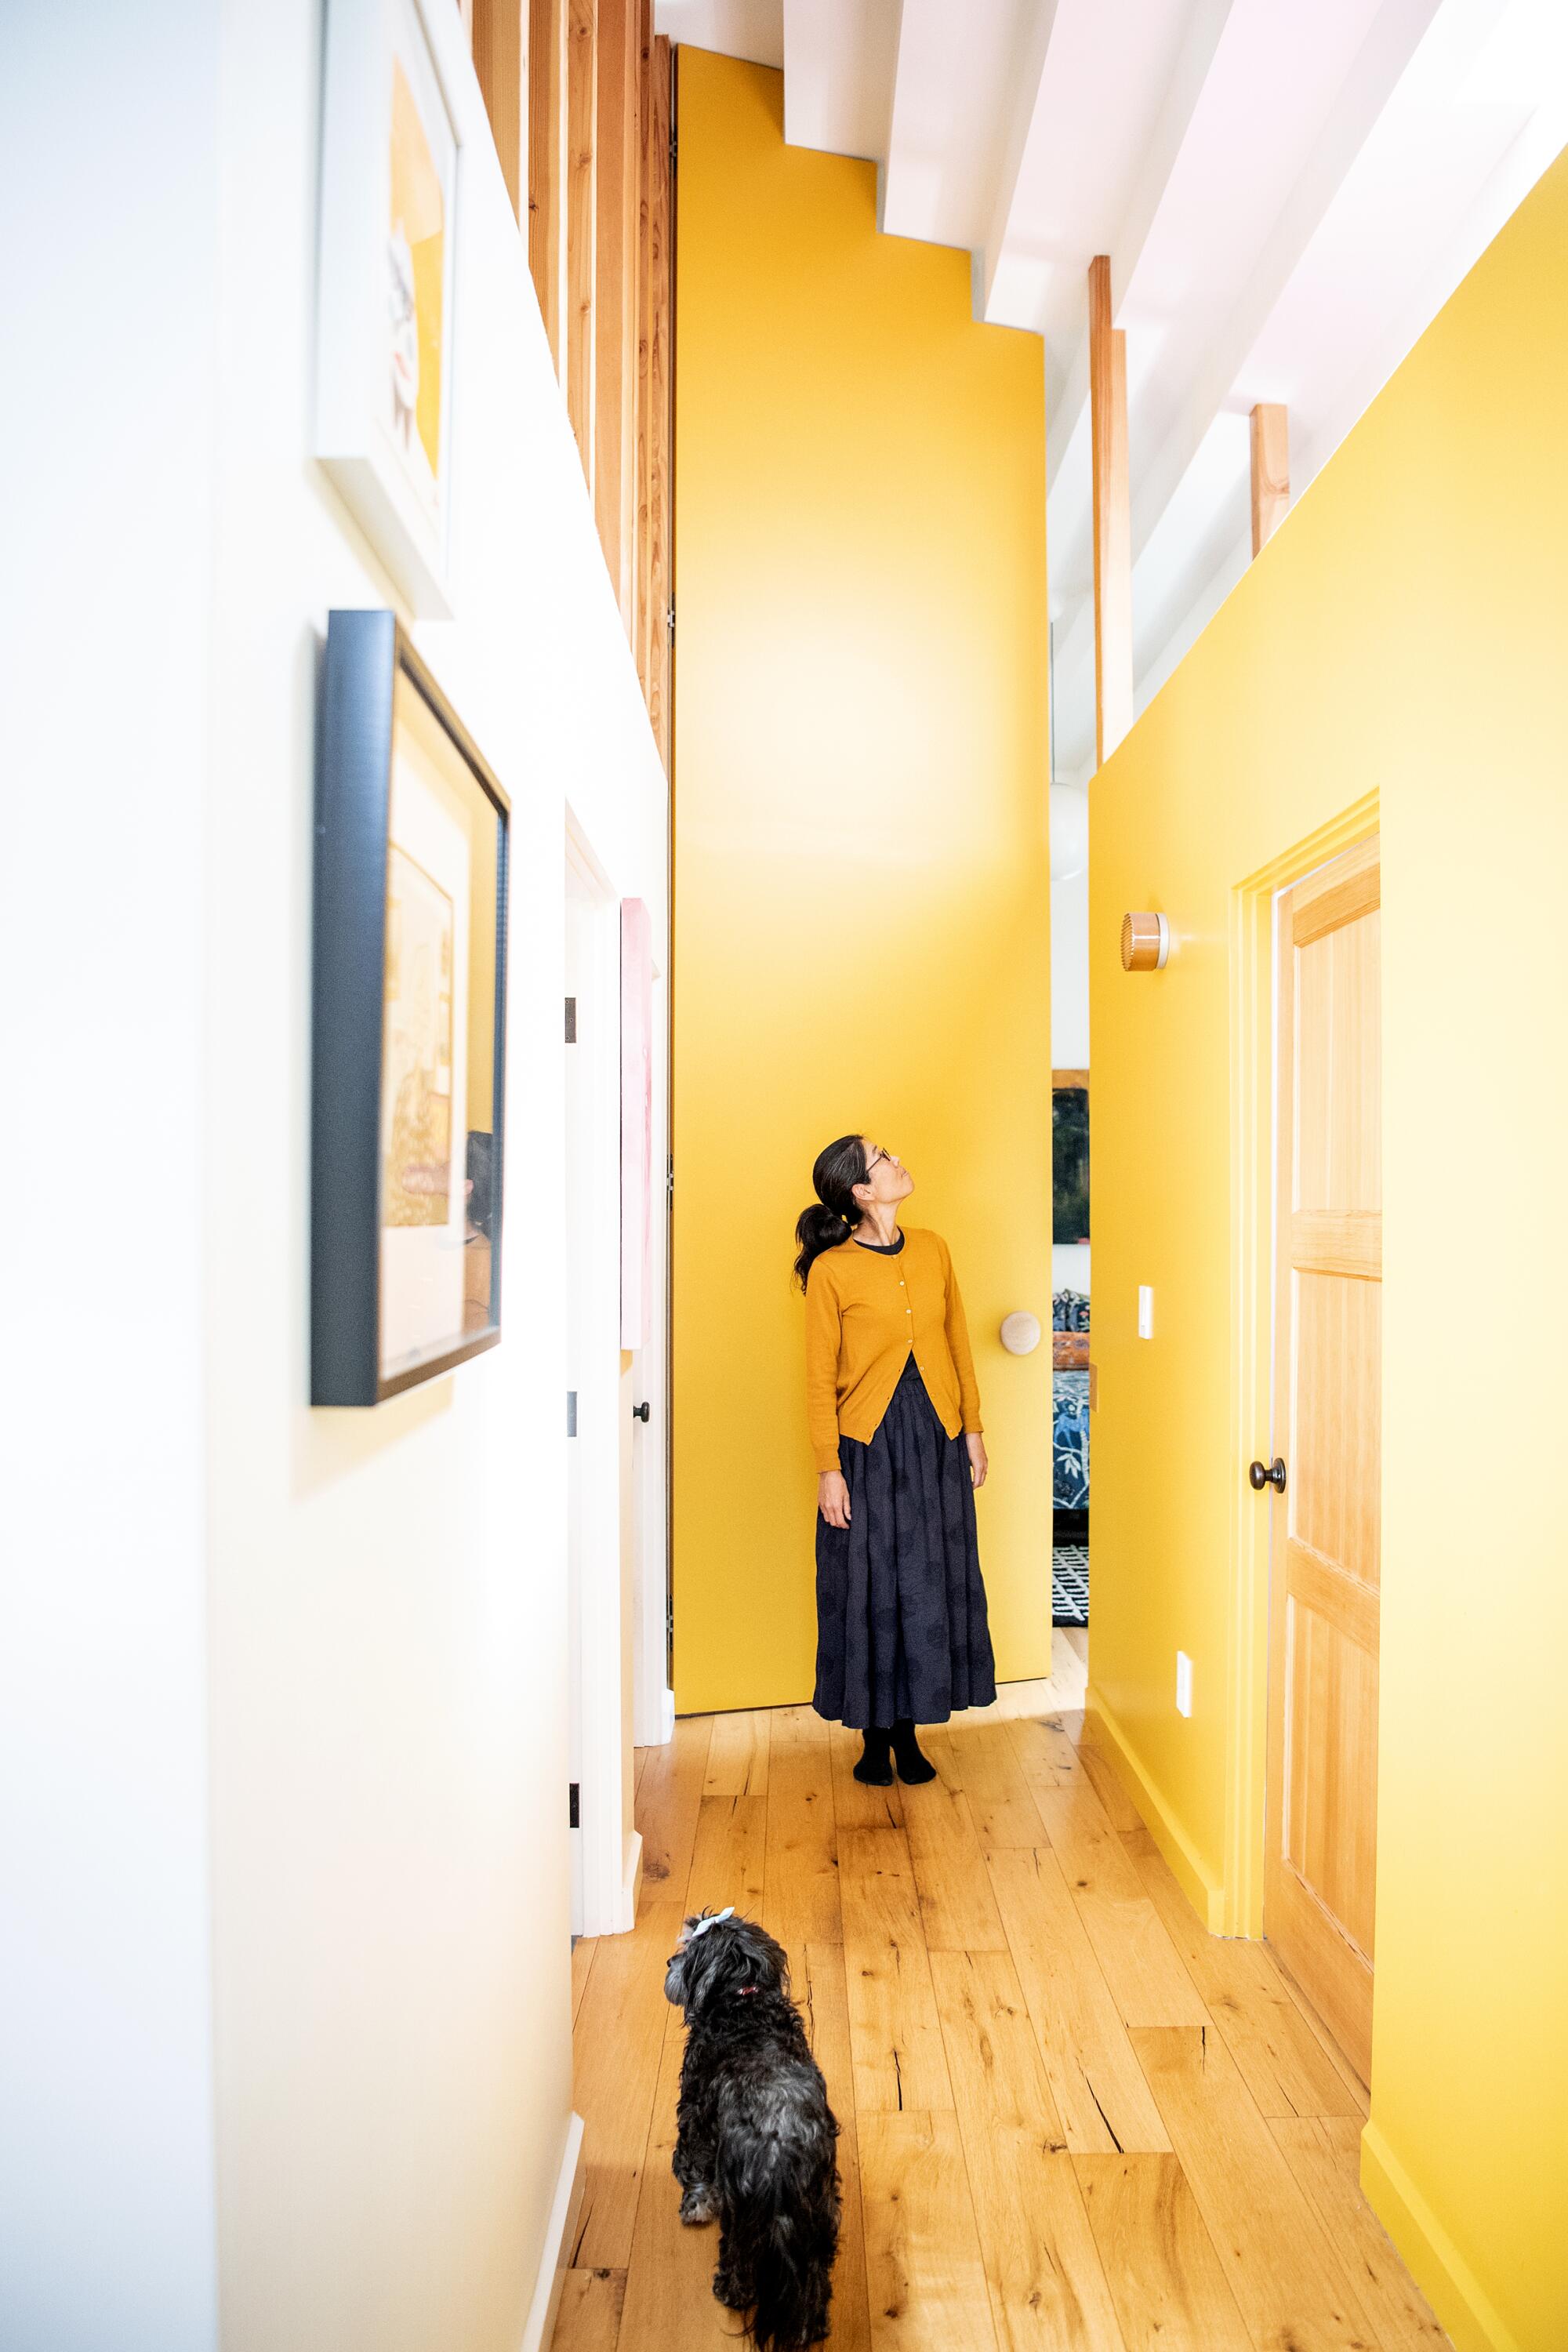 A woman stands in a hallway, in front of a tall door that's ajar, with a small black dog.